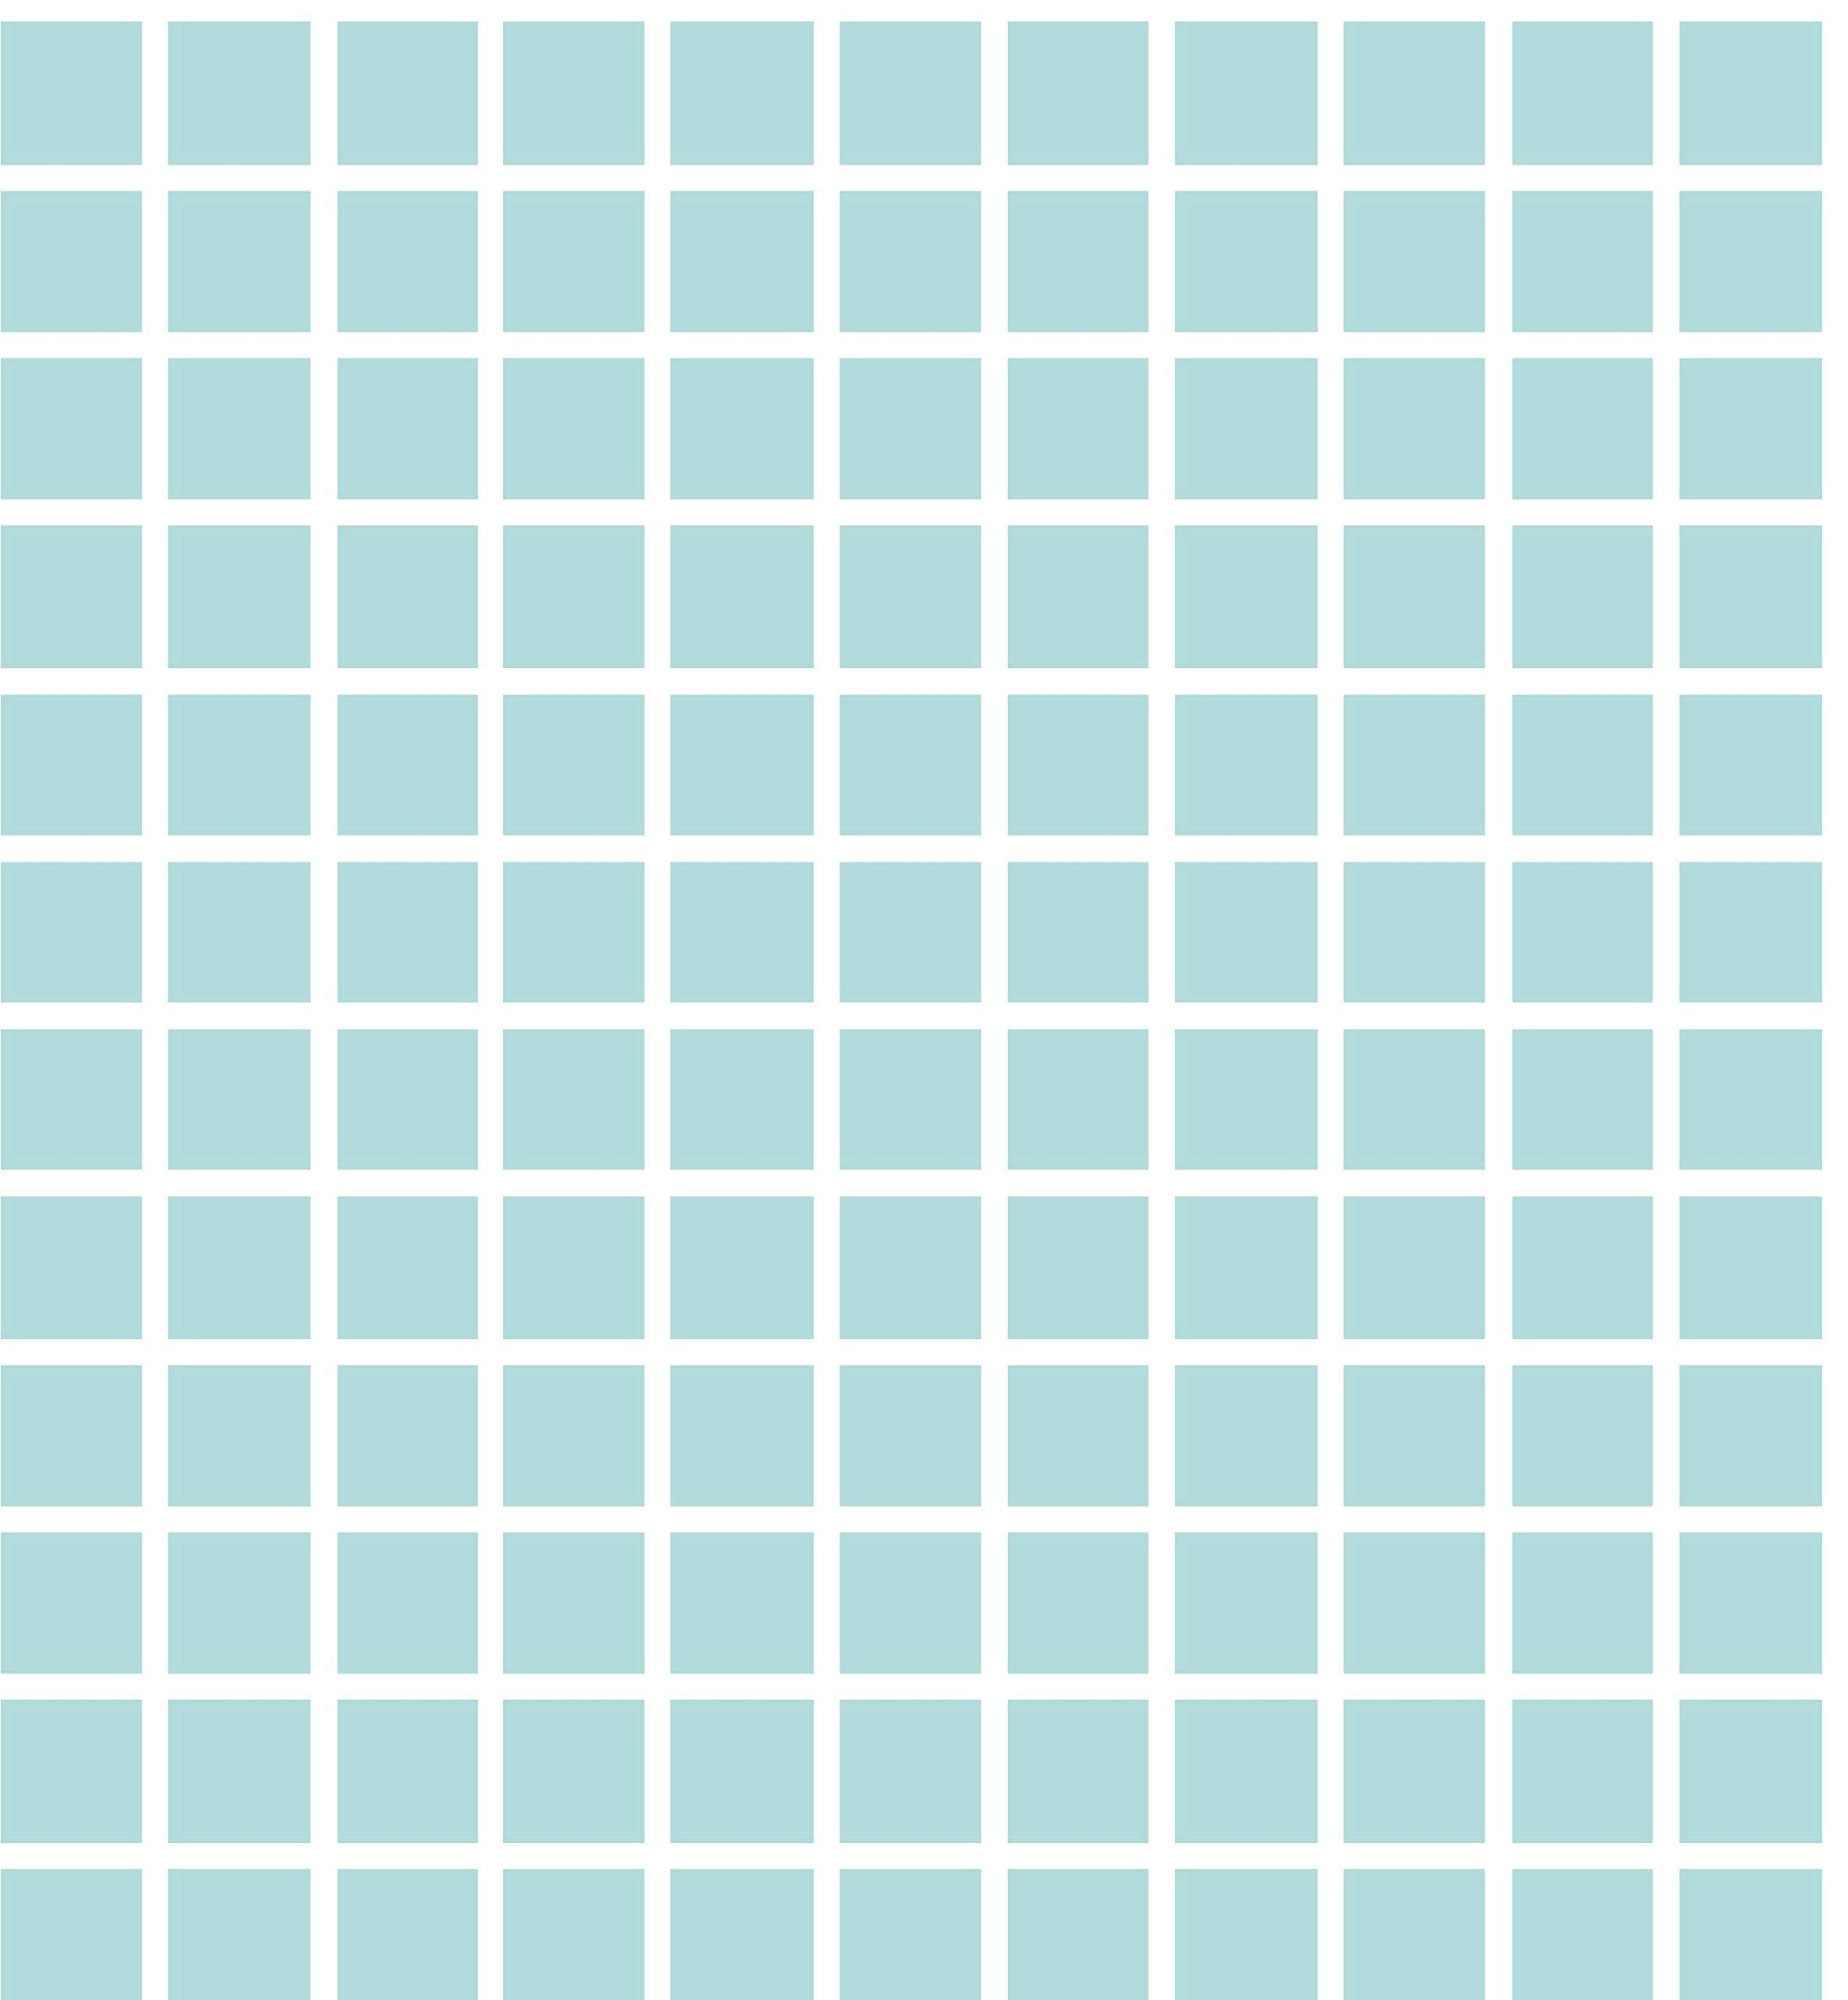 A grid of small blue squares on a white background - Cyan